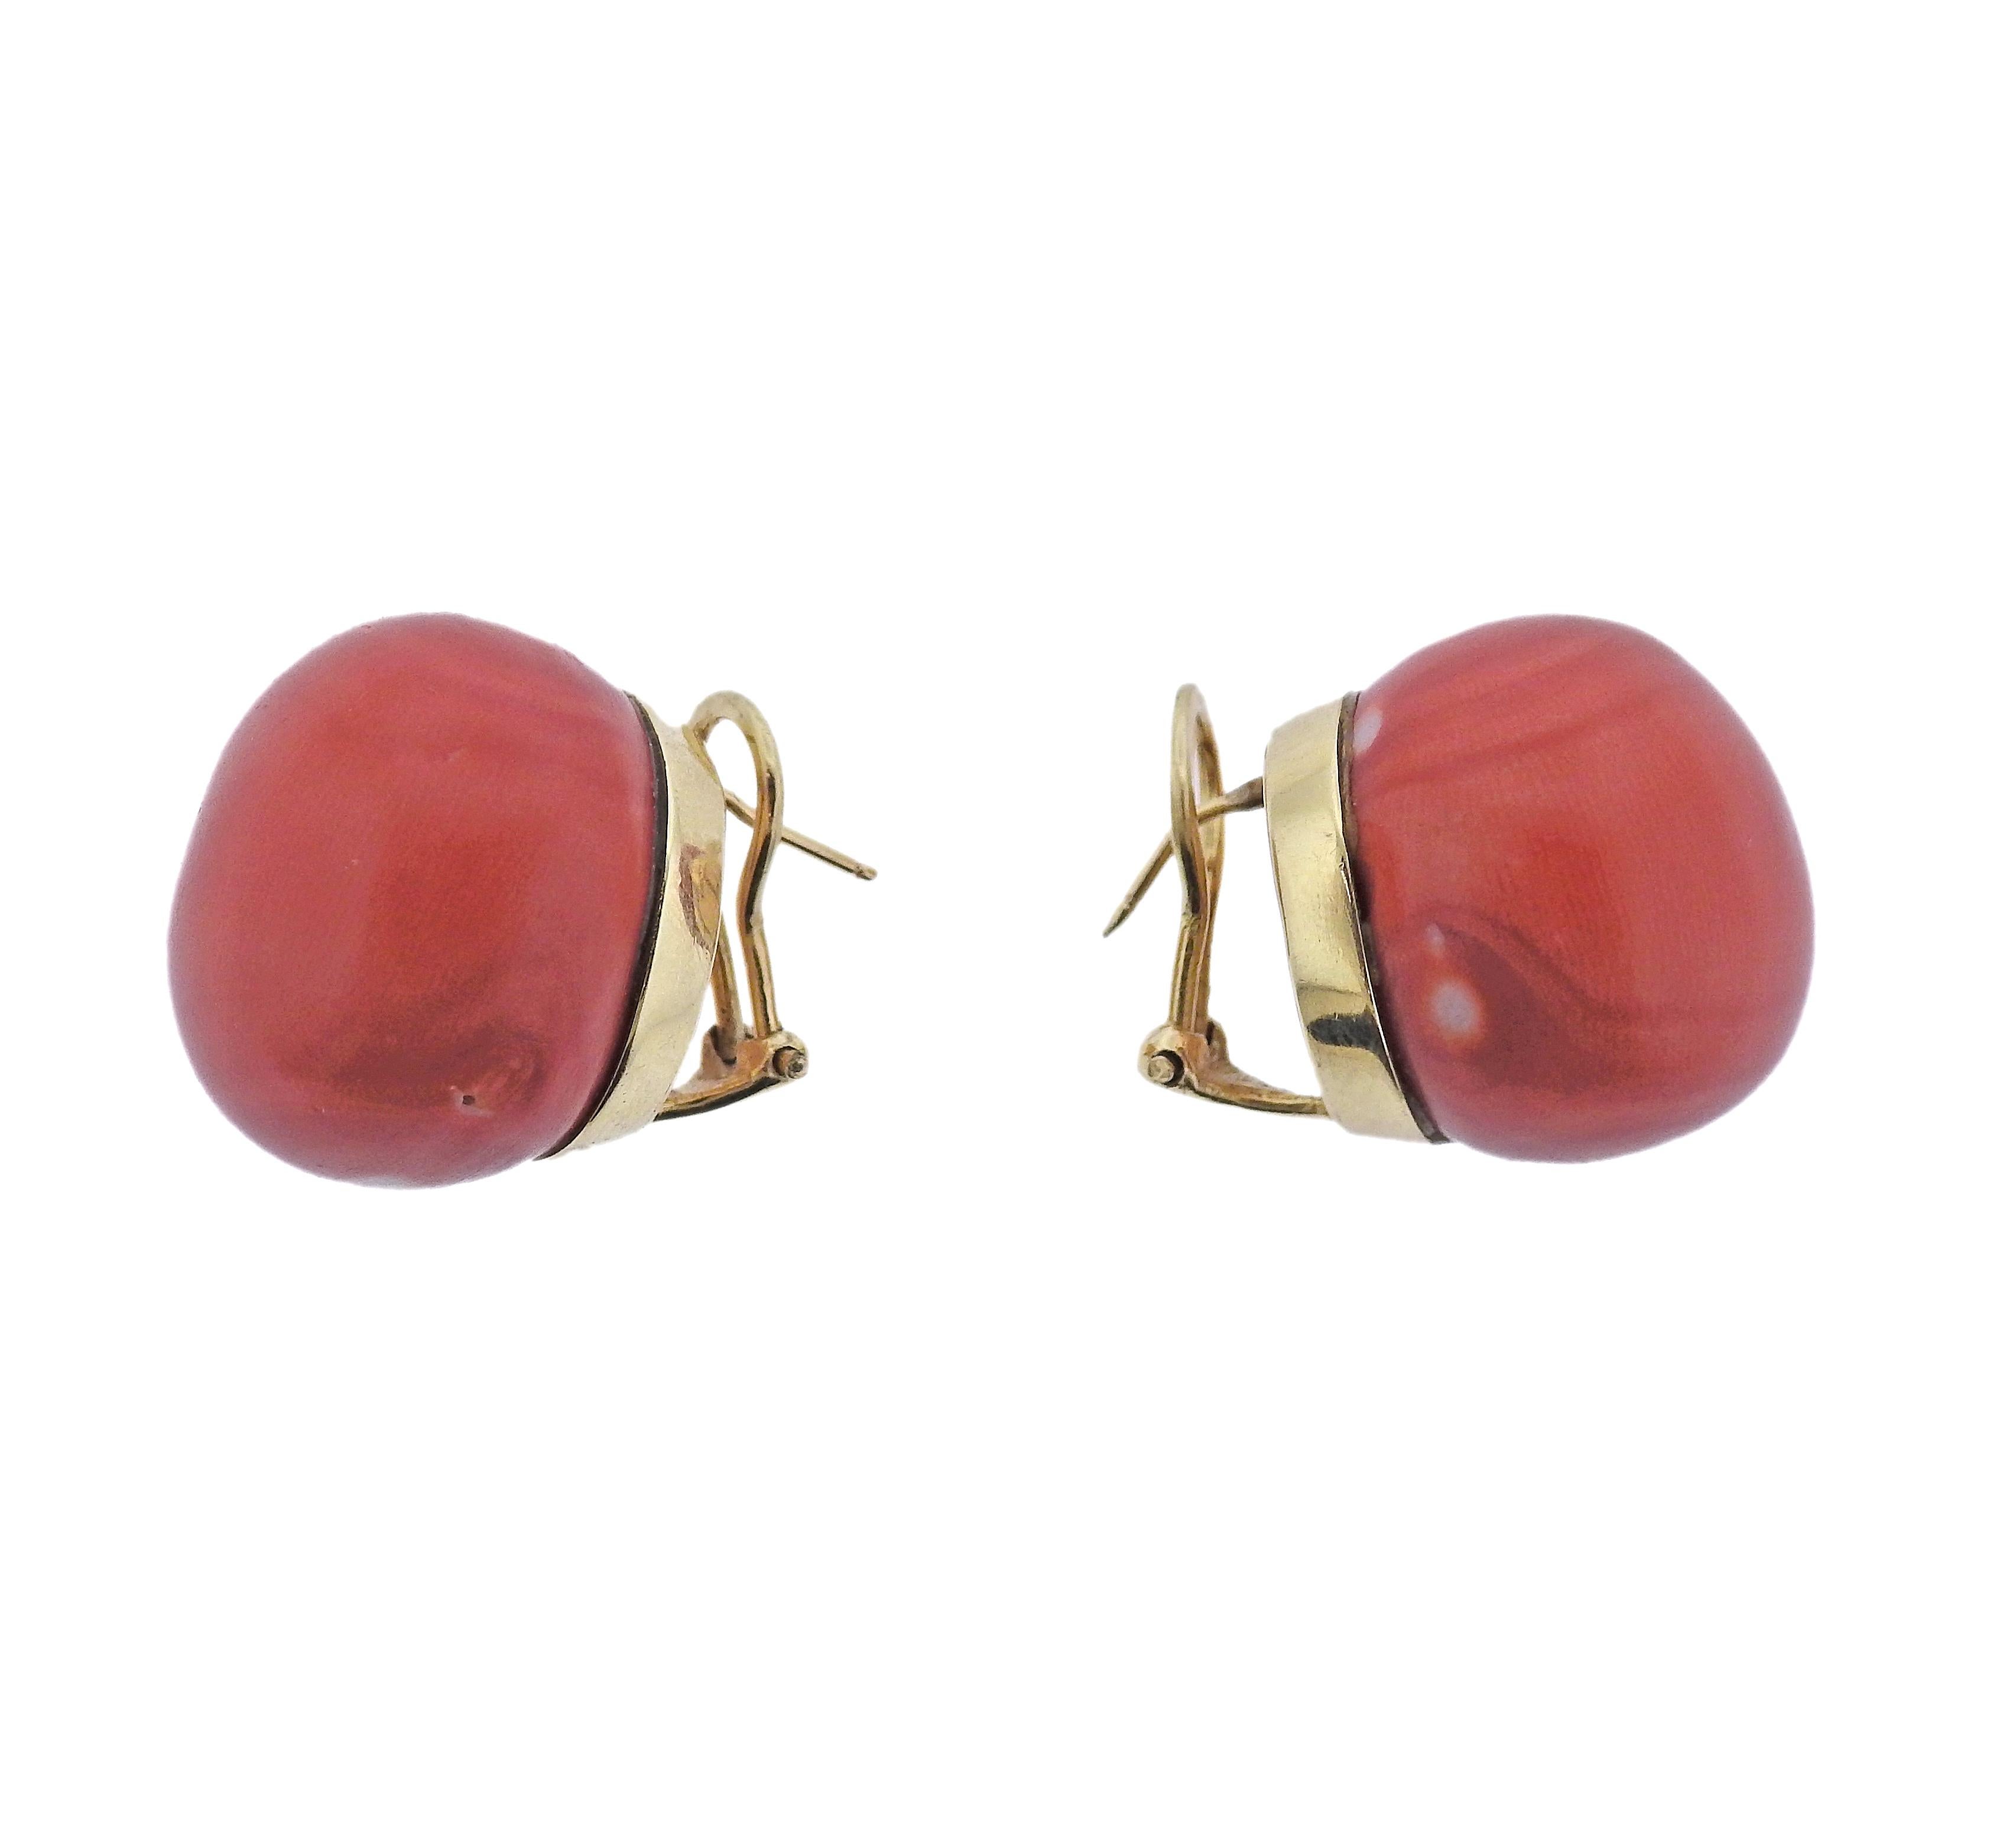 Pair of large vintage 14k gold earrings with 21mm in diameter coral gems. Marked 14k on backs. Weight - 26.4 grams.